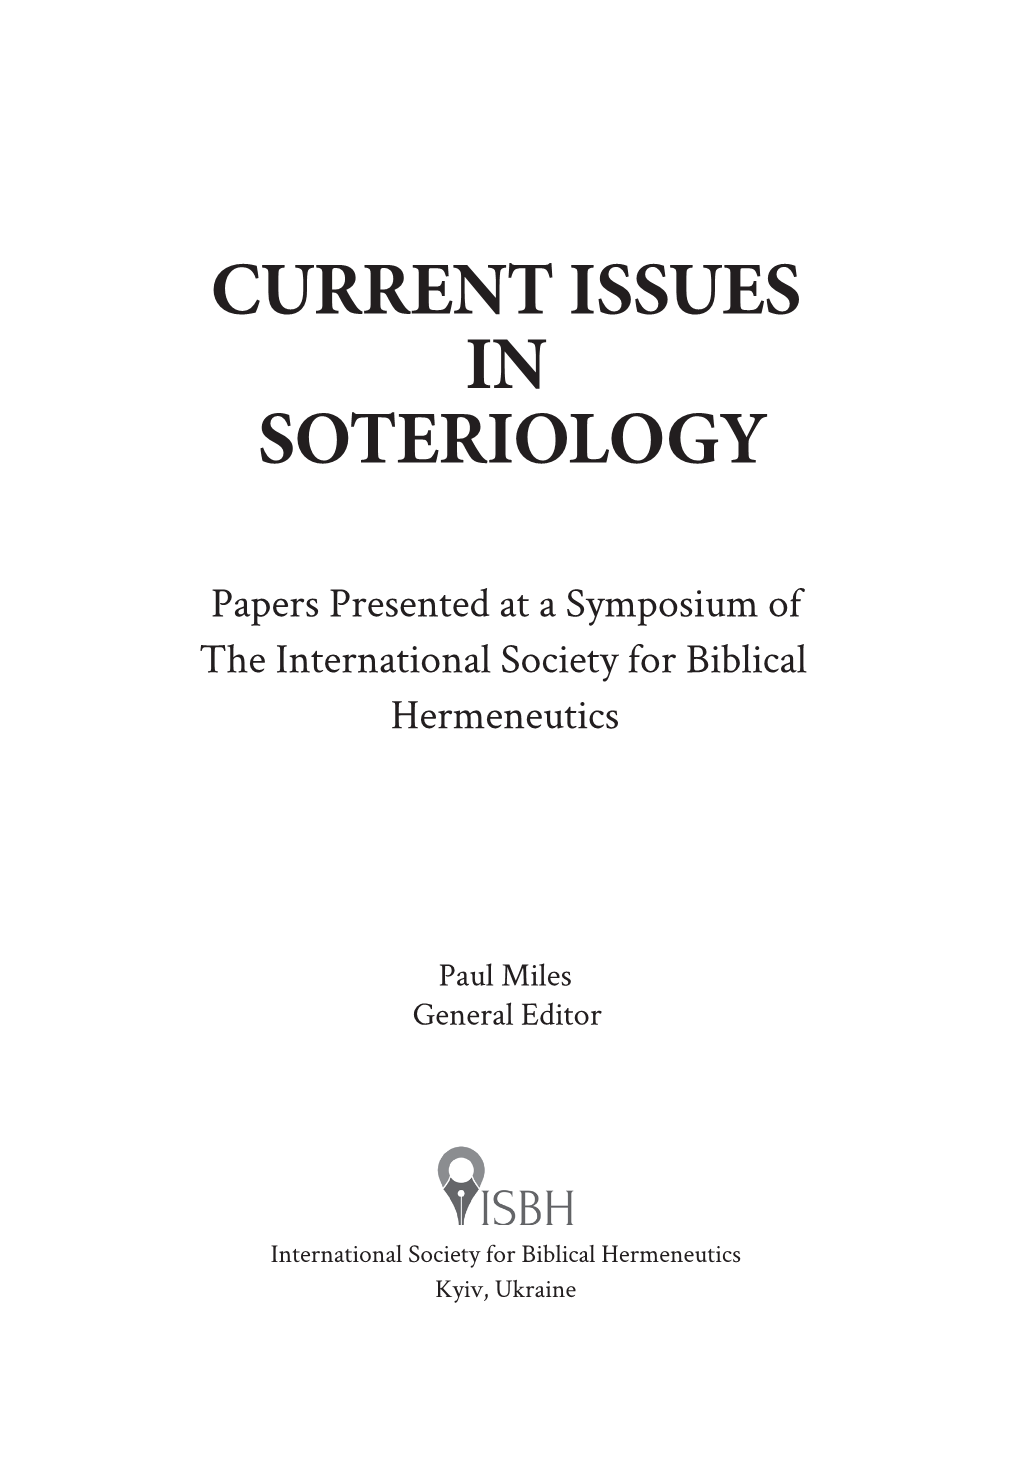 Current Issues in Soteriology.Indd